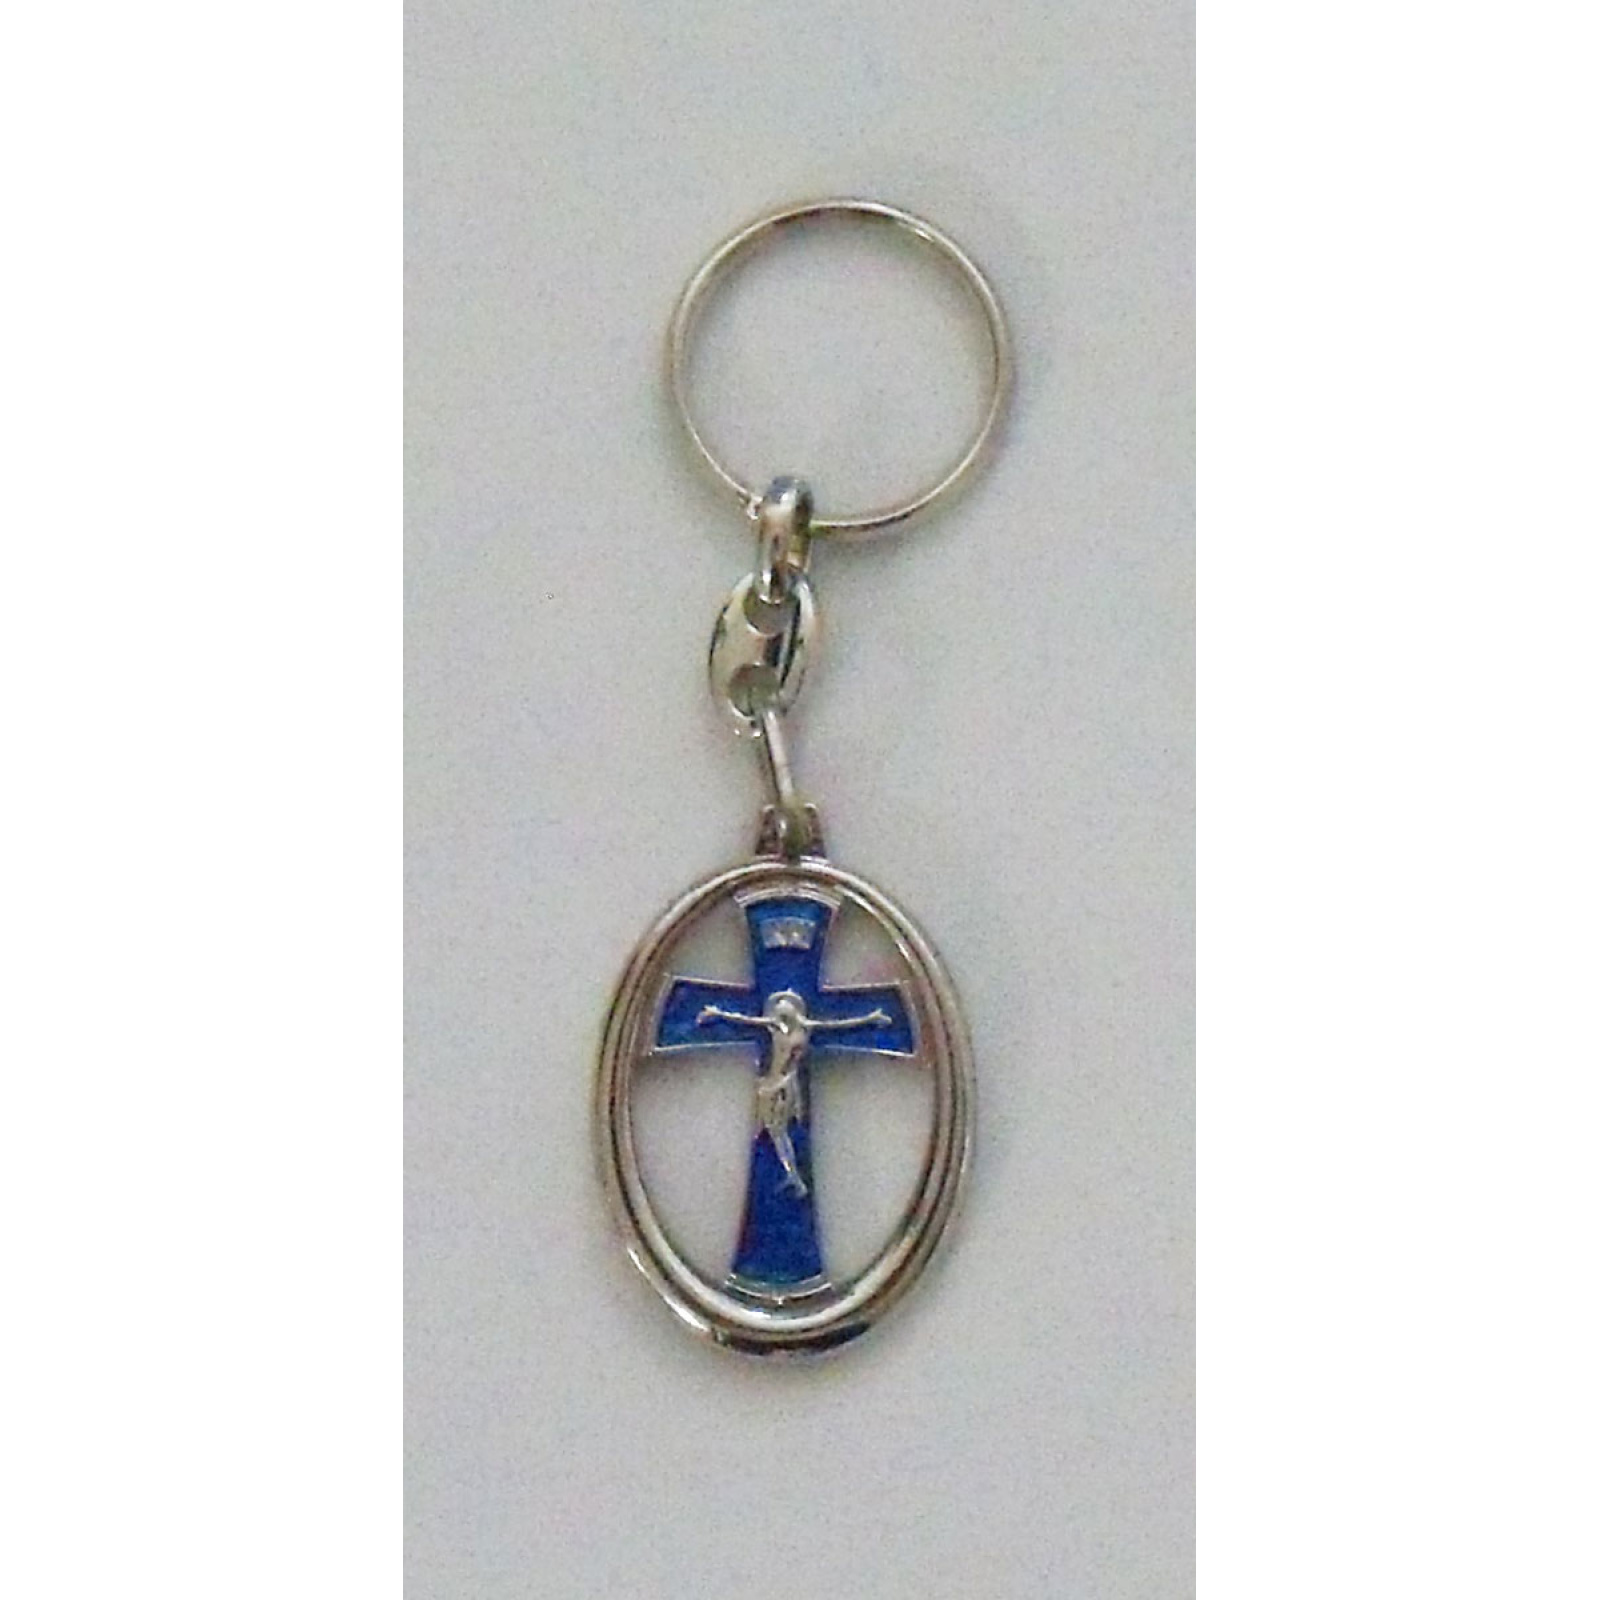 Cross keychain with enamel colors